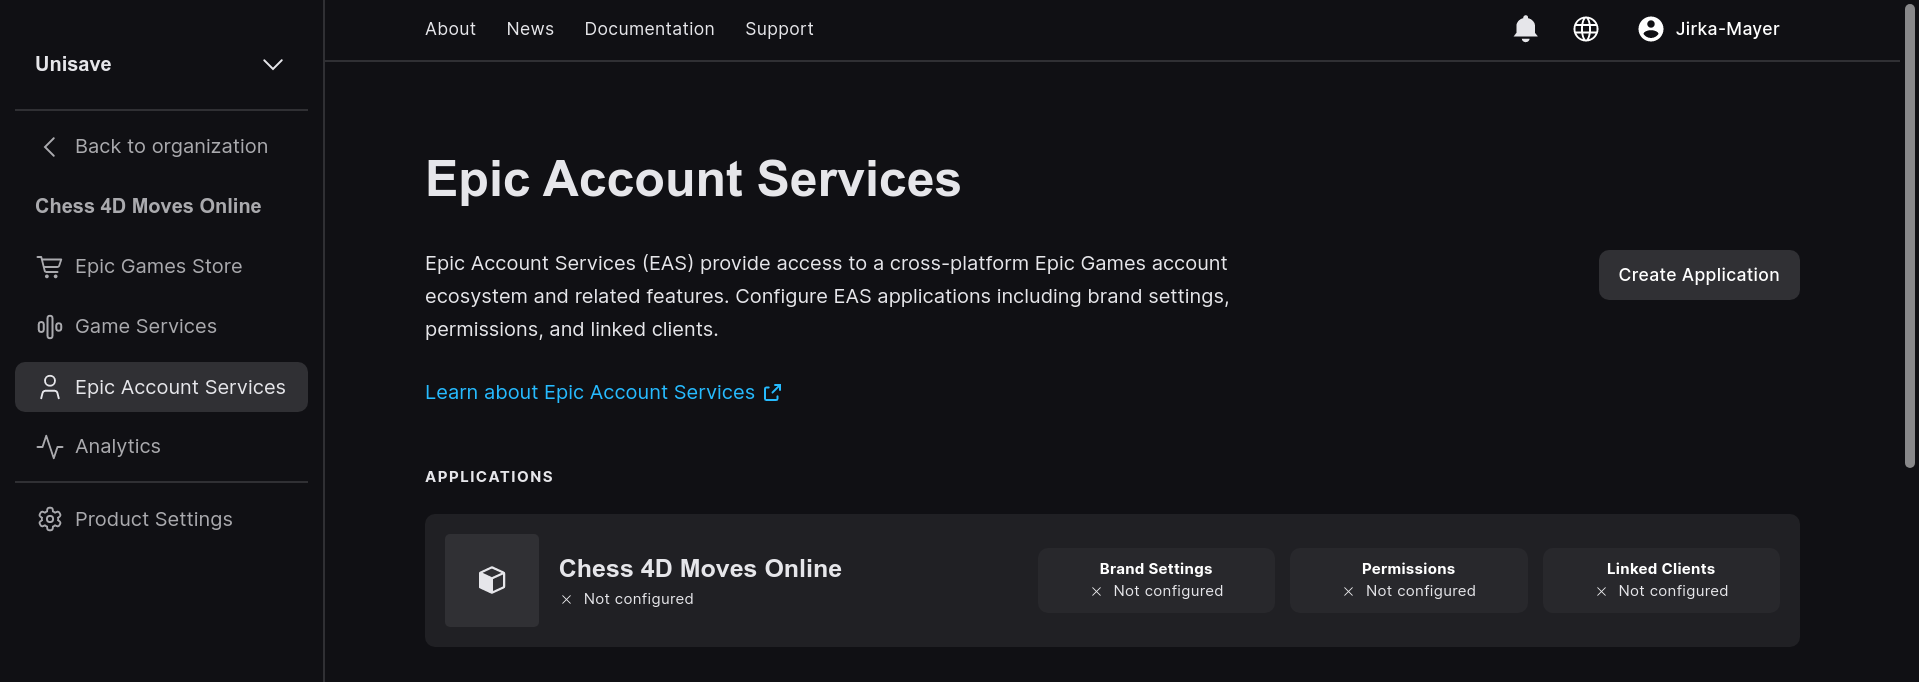 Epic Account Services page with the unconfigured application